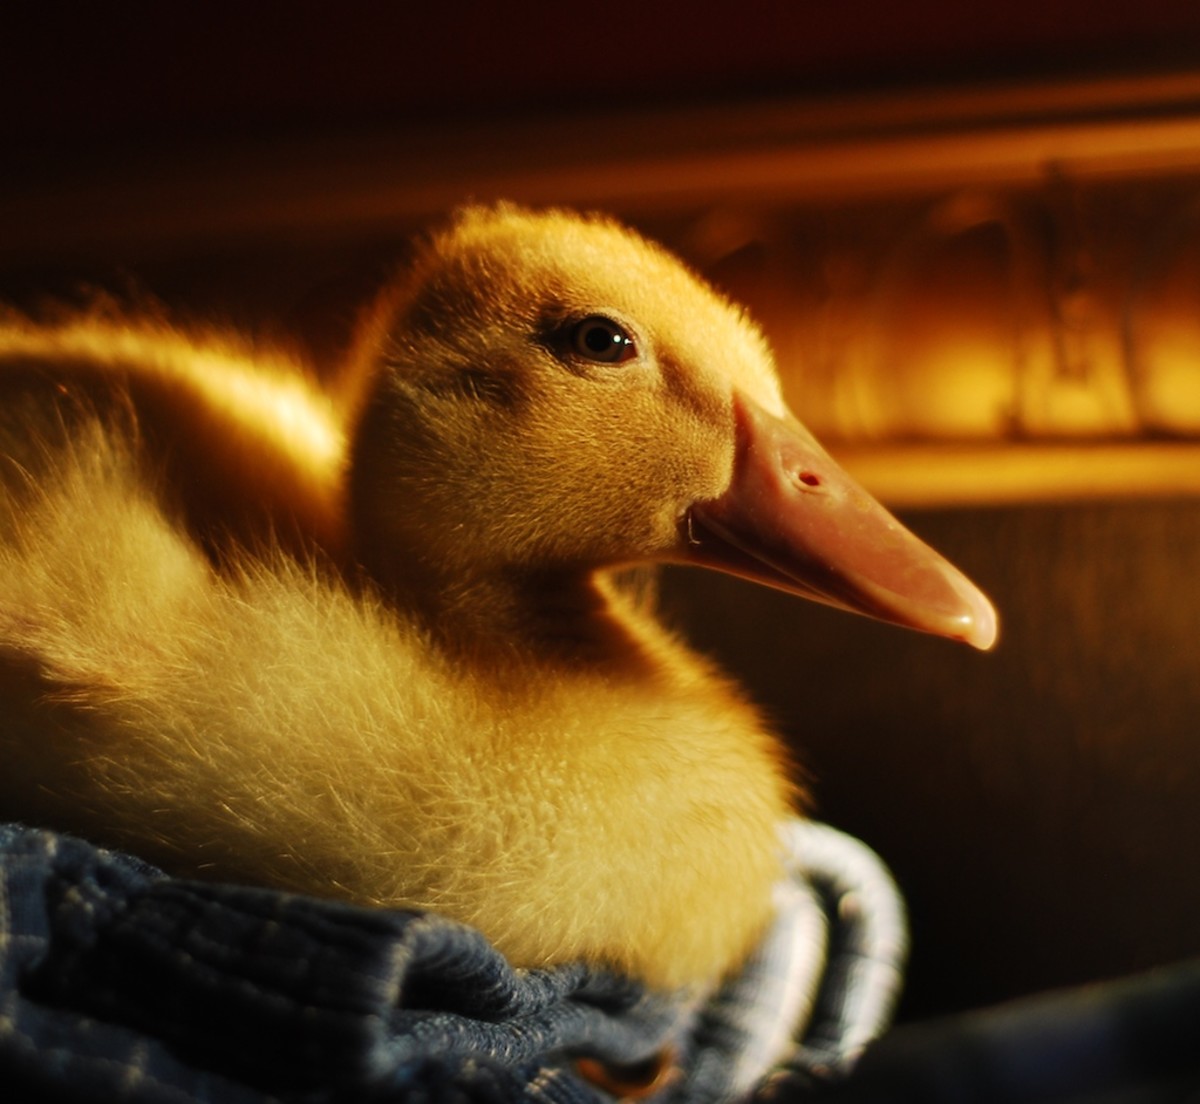 Imprinted buff Orpington duckling Louise rests on the back of the sofa. (Photo by Shanti Perez)